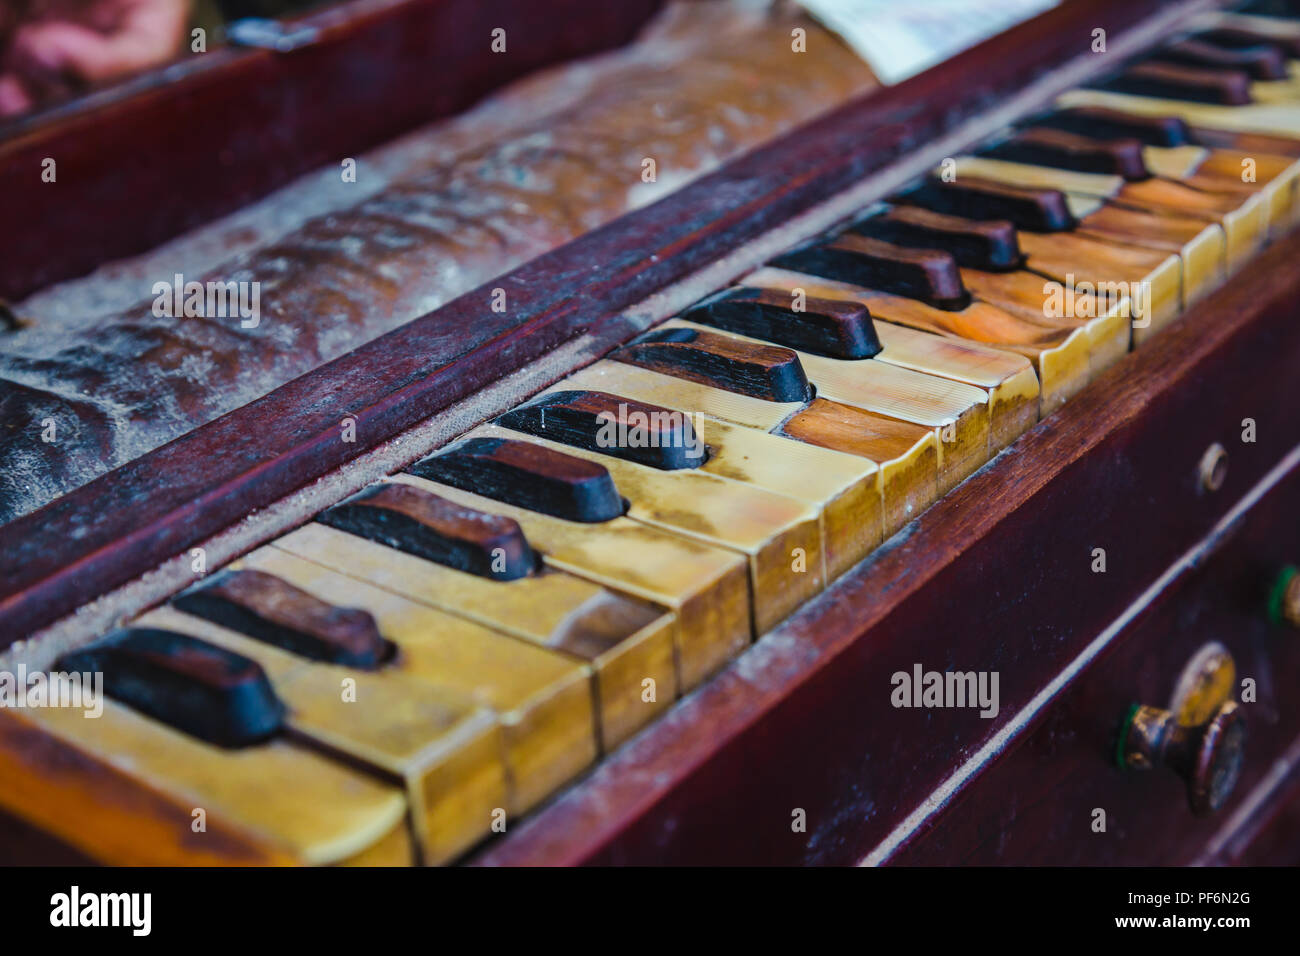 Close-up of  Shot of Traditional Old and Dusty Harmonium Keyboard. Stock Photo